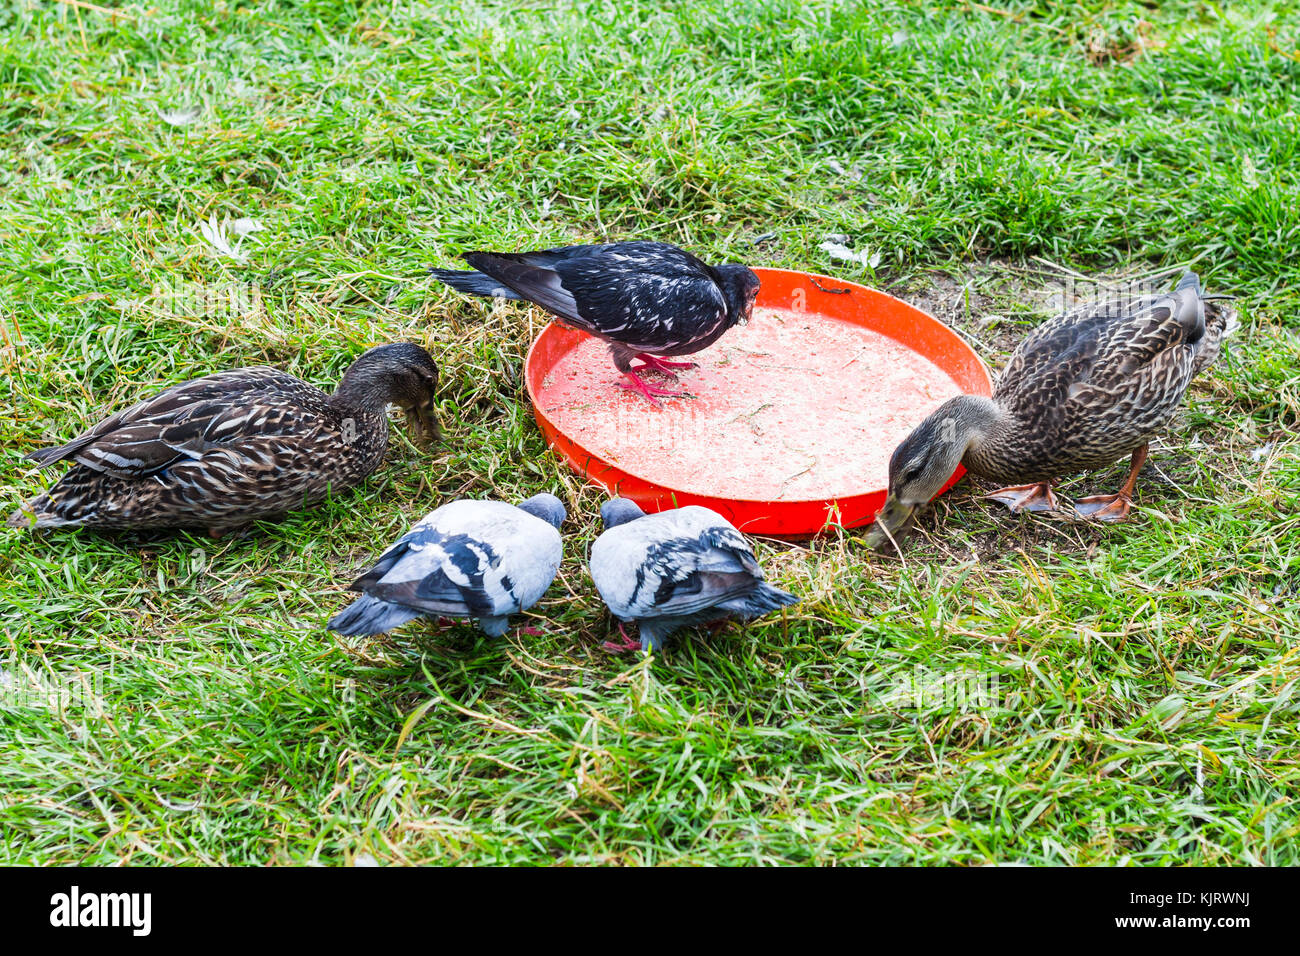 travel to Iceland - pigeons and ducks near the plastic feeder in public family park in laugardalur valley of Reykjavik city in september Stock Photo